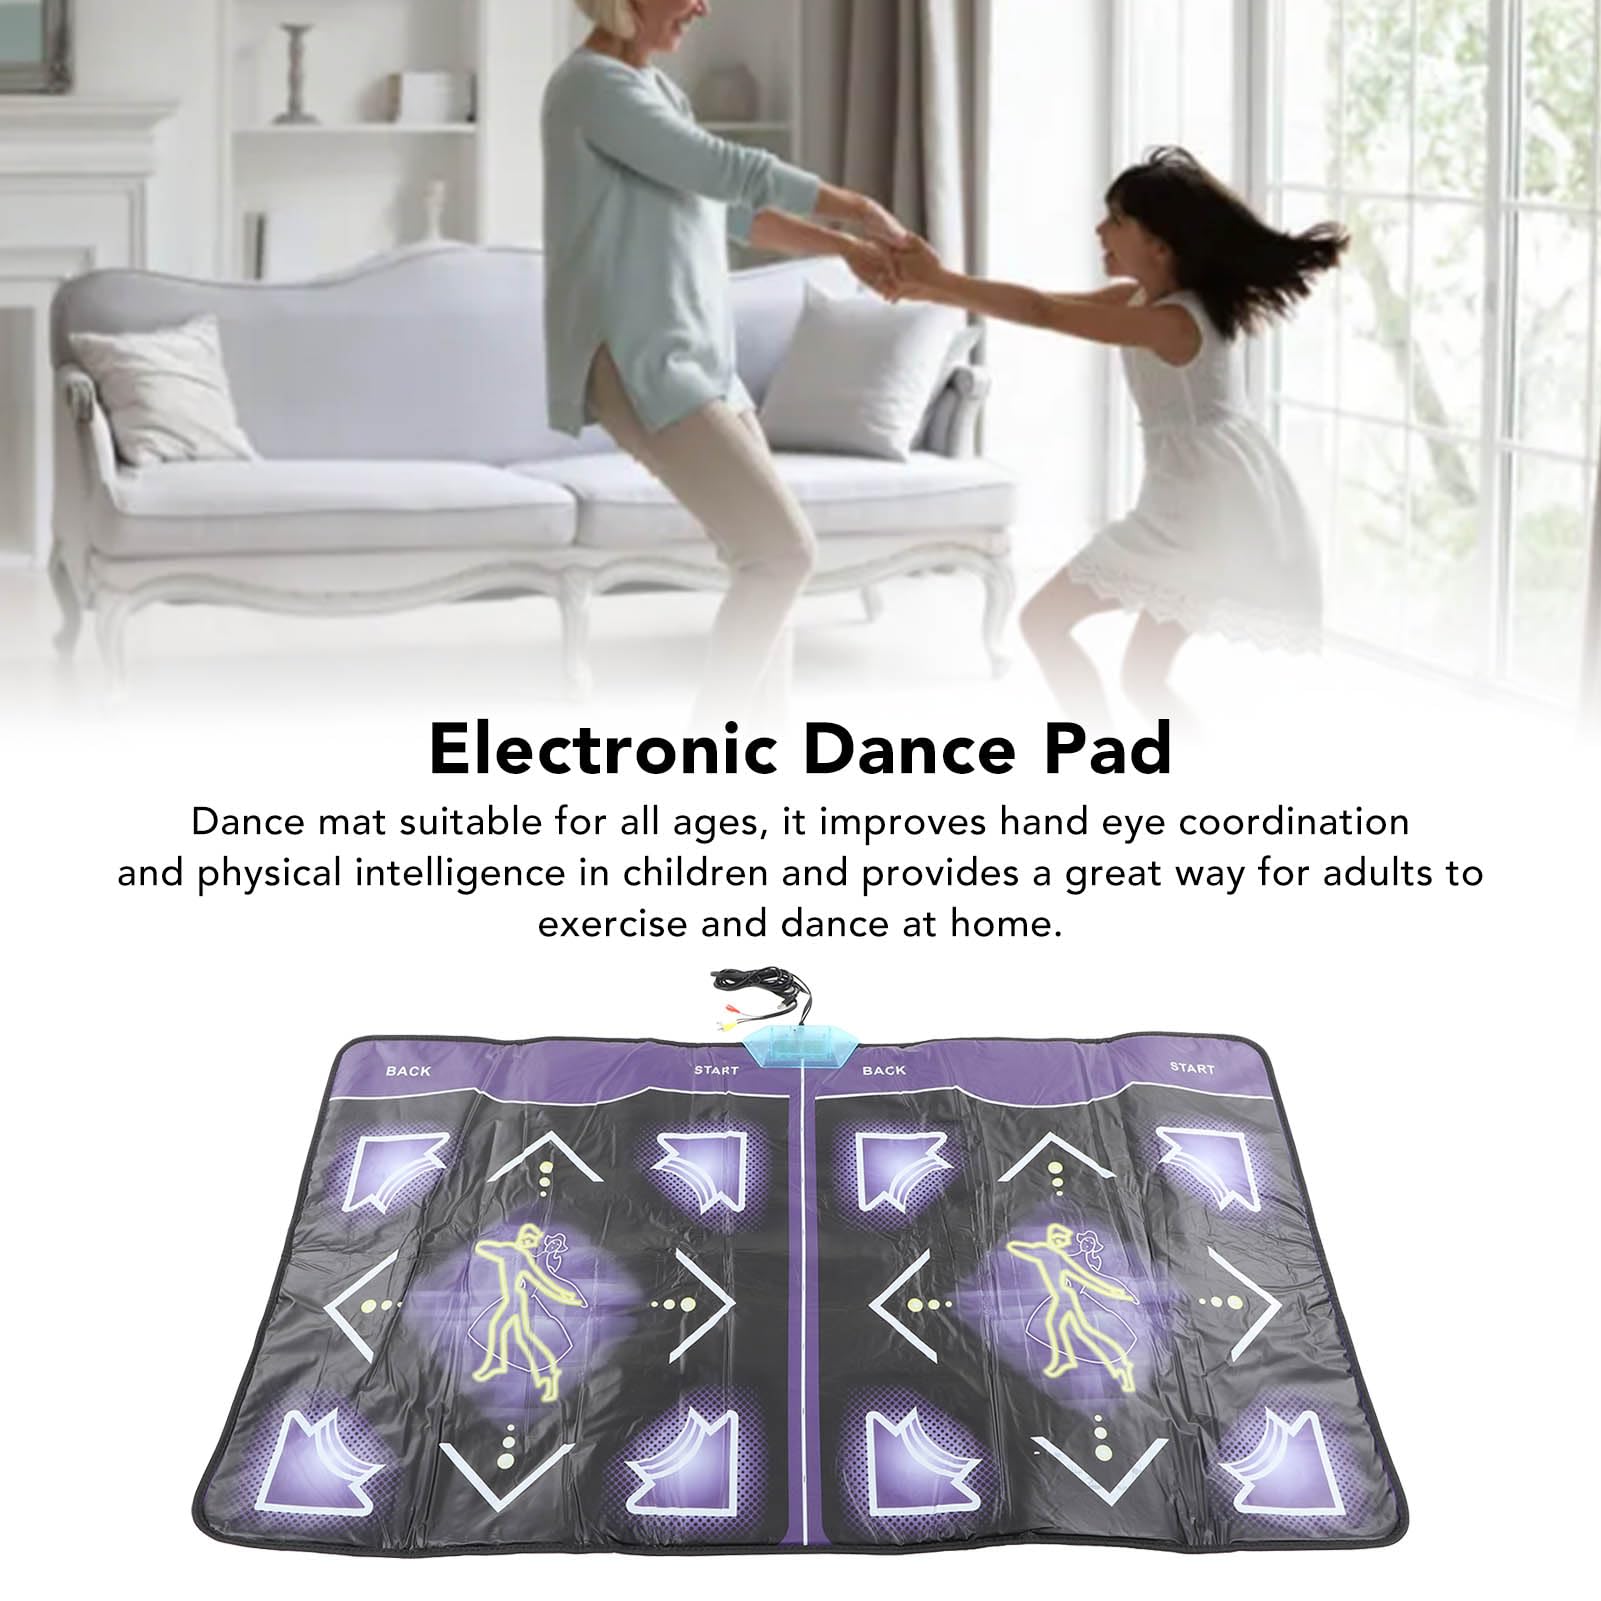 Luqeeg Wireless Electronic Dance Mats, Double User Exercise Fitness Playmat, Non Slip Dancing Pad with Remote Control for Improve Coordination, Family Entertainment, Musical Gift Toy